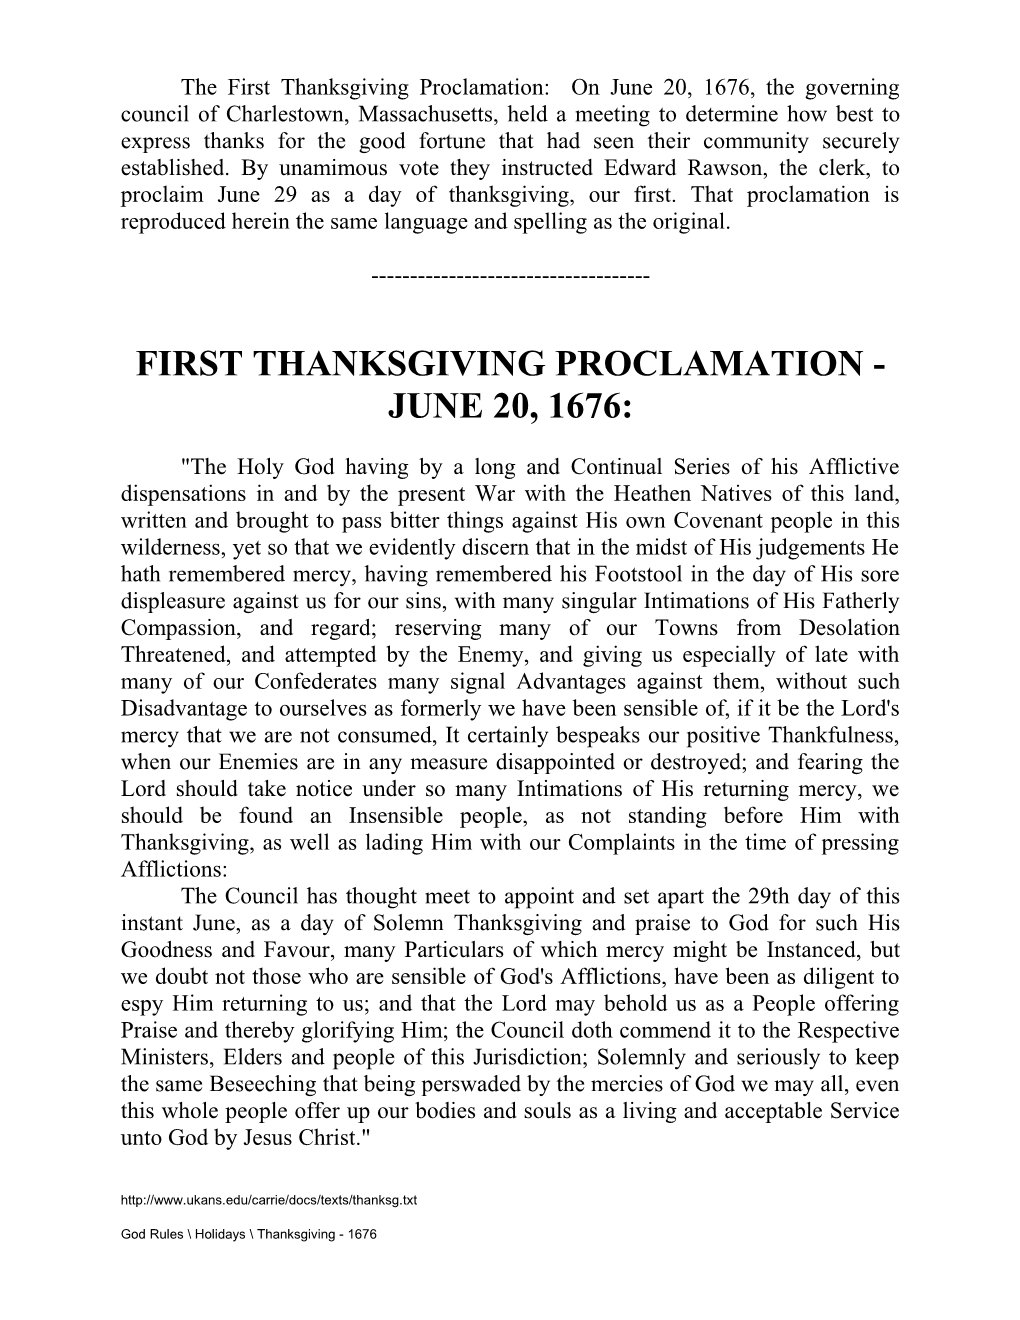 The First Thanksgiving Proclamation - June 20, 1676